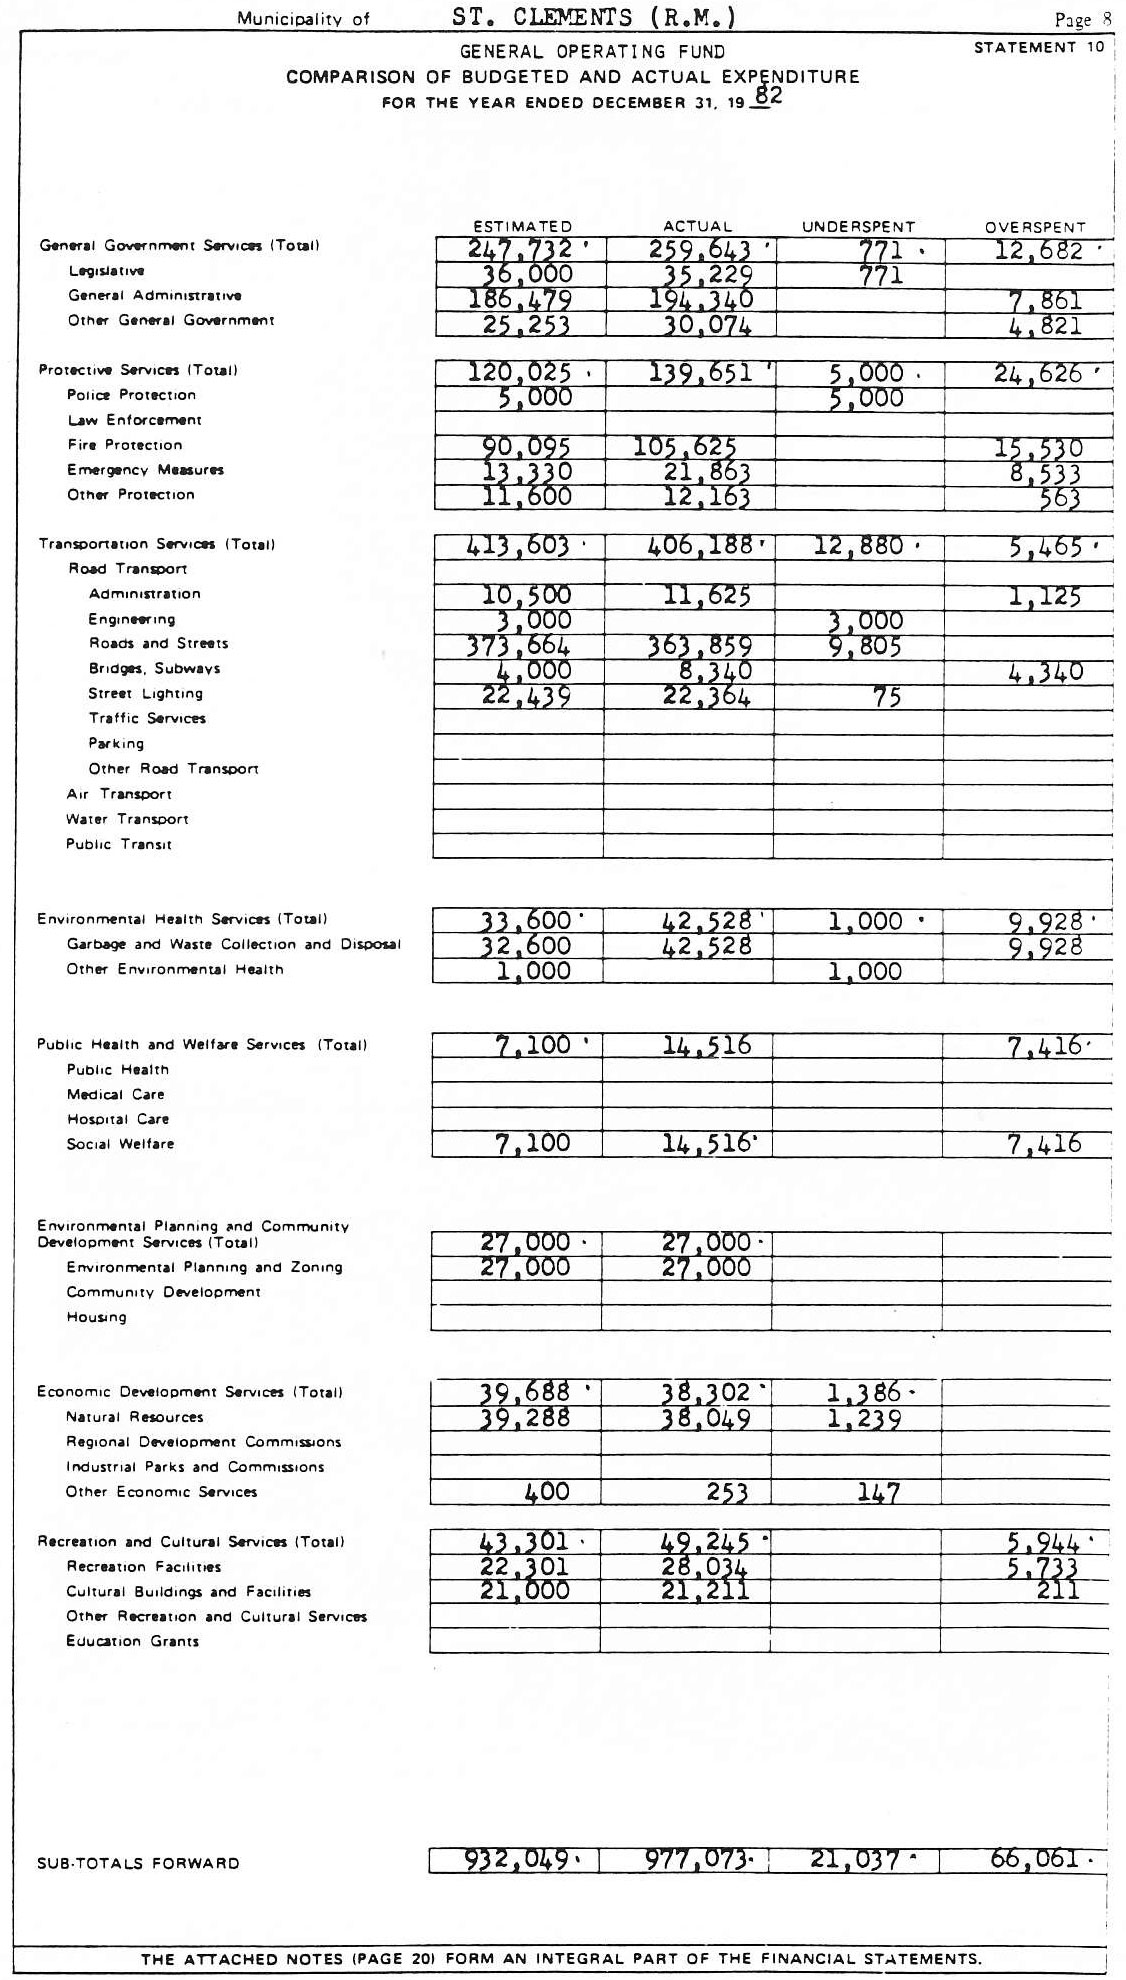 Financial Statement 1982 page 2